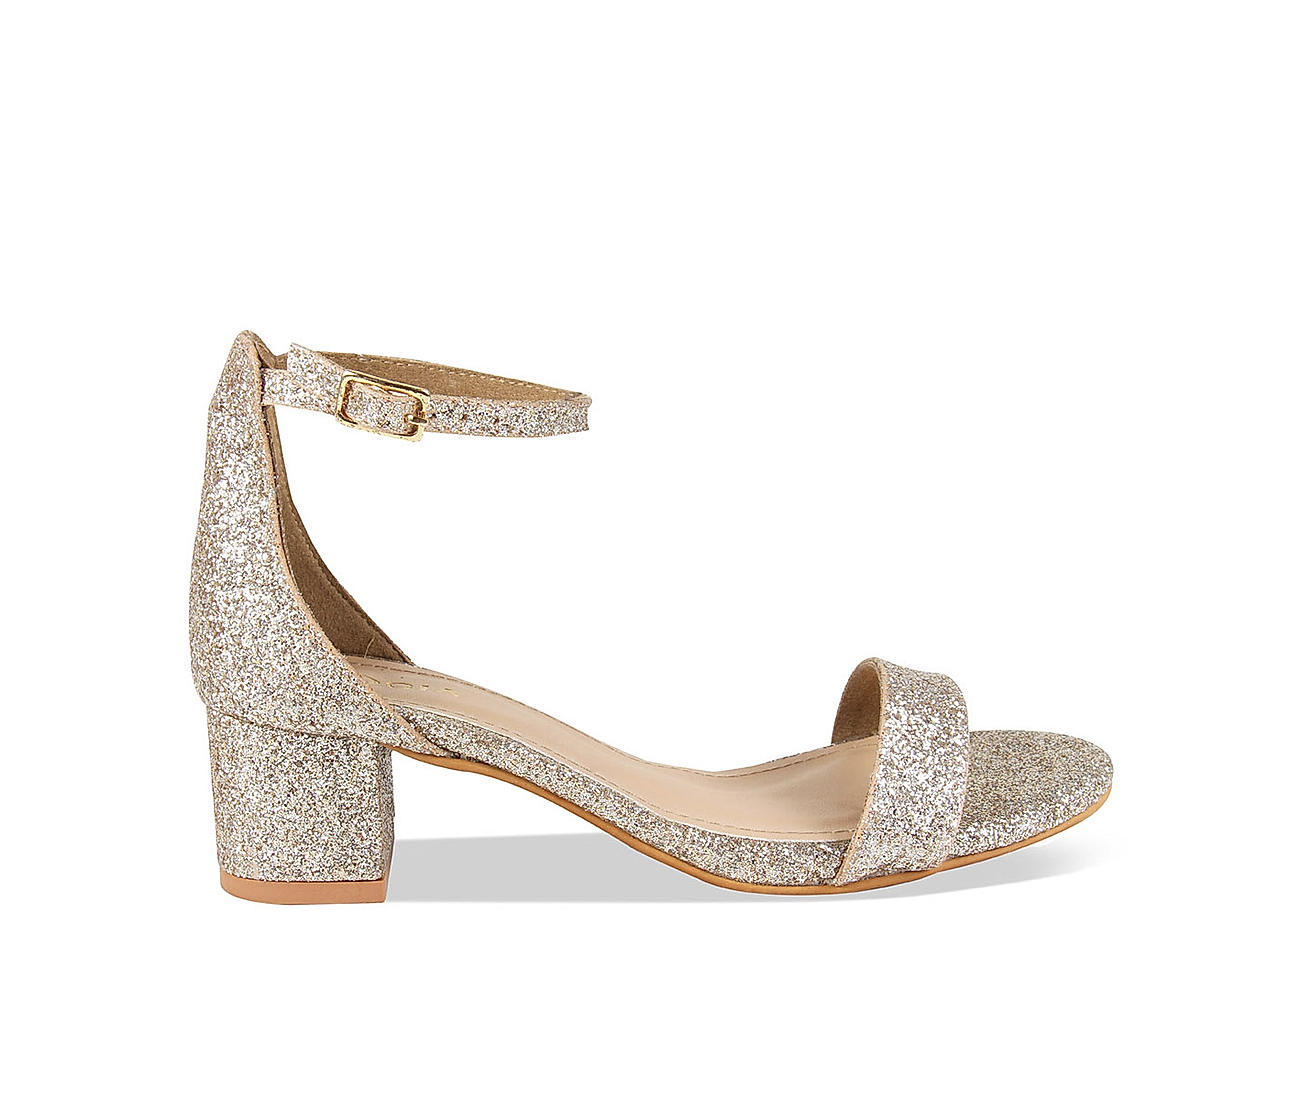 Lib Peep Toe Platforms Chunky Heels Ankle Buckle Straps Sequins Sandals -  Gold in Sexy Heels & Platforms - $72.06